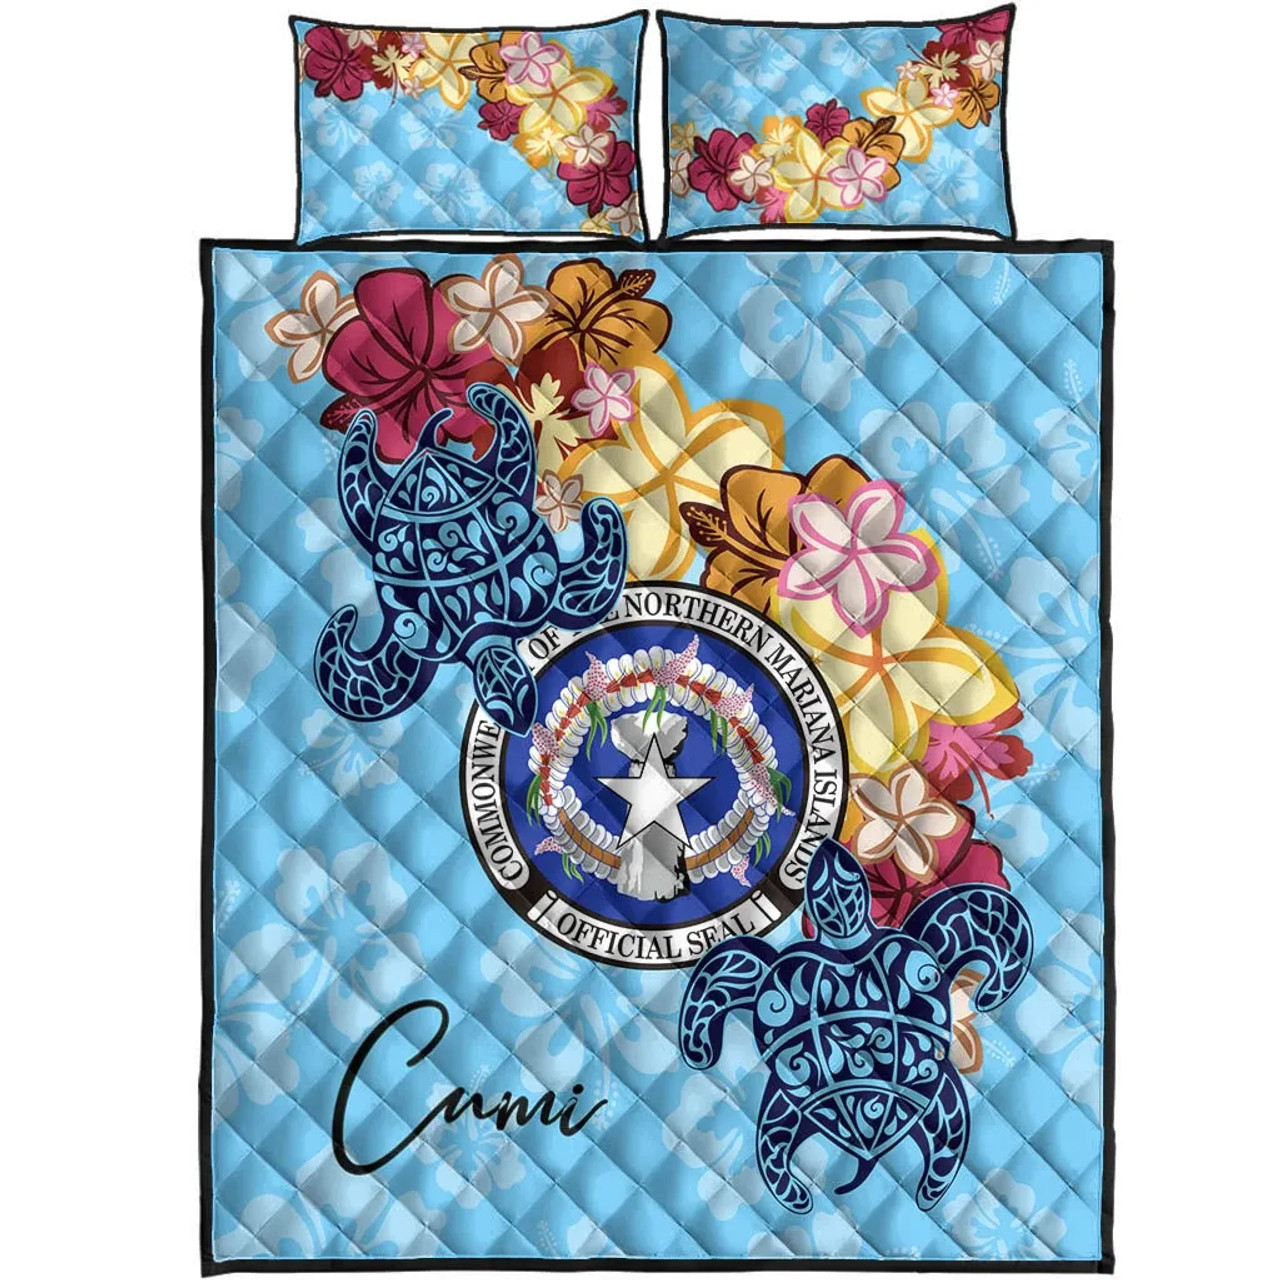 Northern Mariana Islands Quilt Bed Set - Tropical Style 4